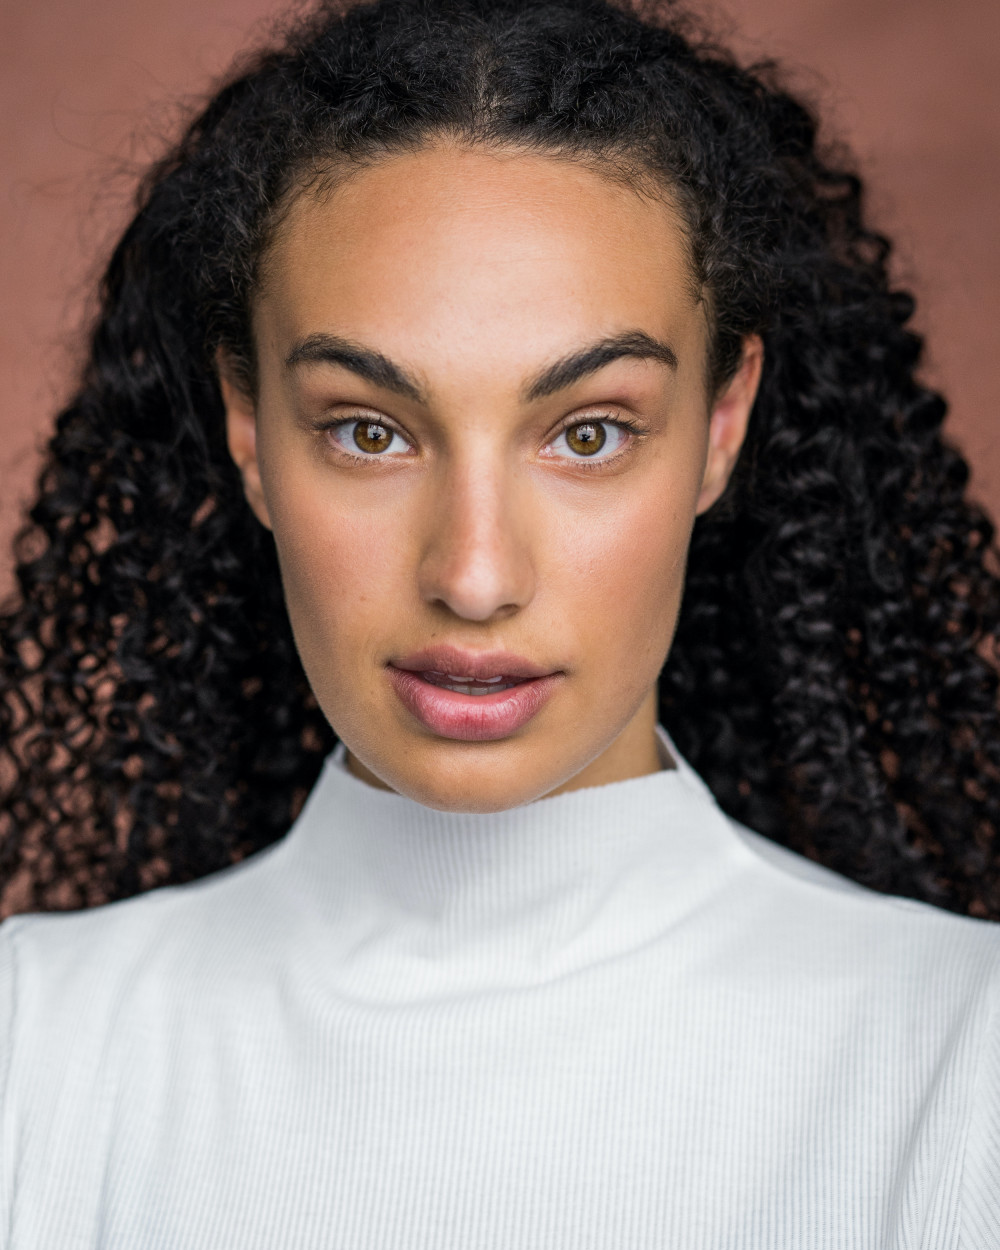 Amelia Walker (25) from Stamford is joining the cast of Jack and the Beanstalk at The London Palladium